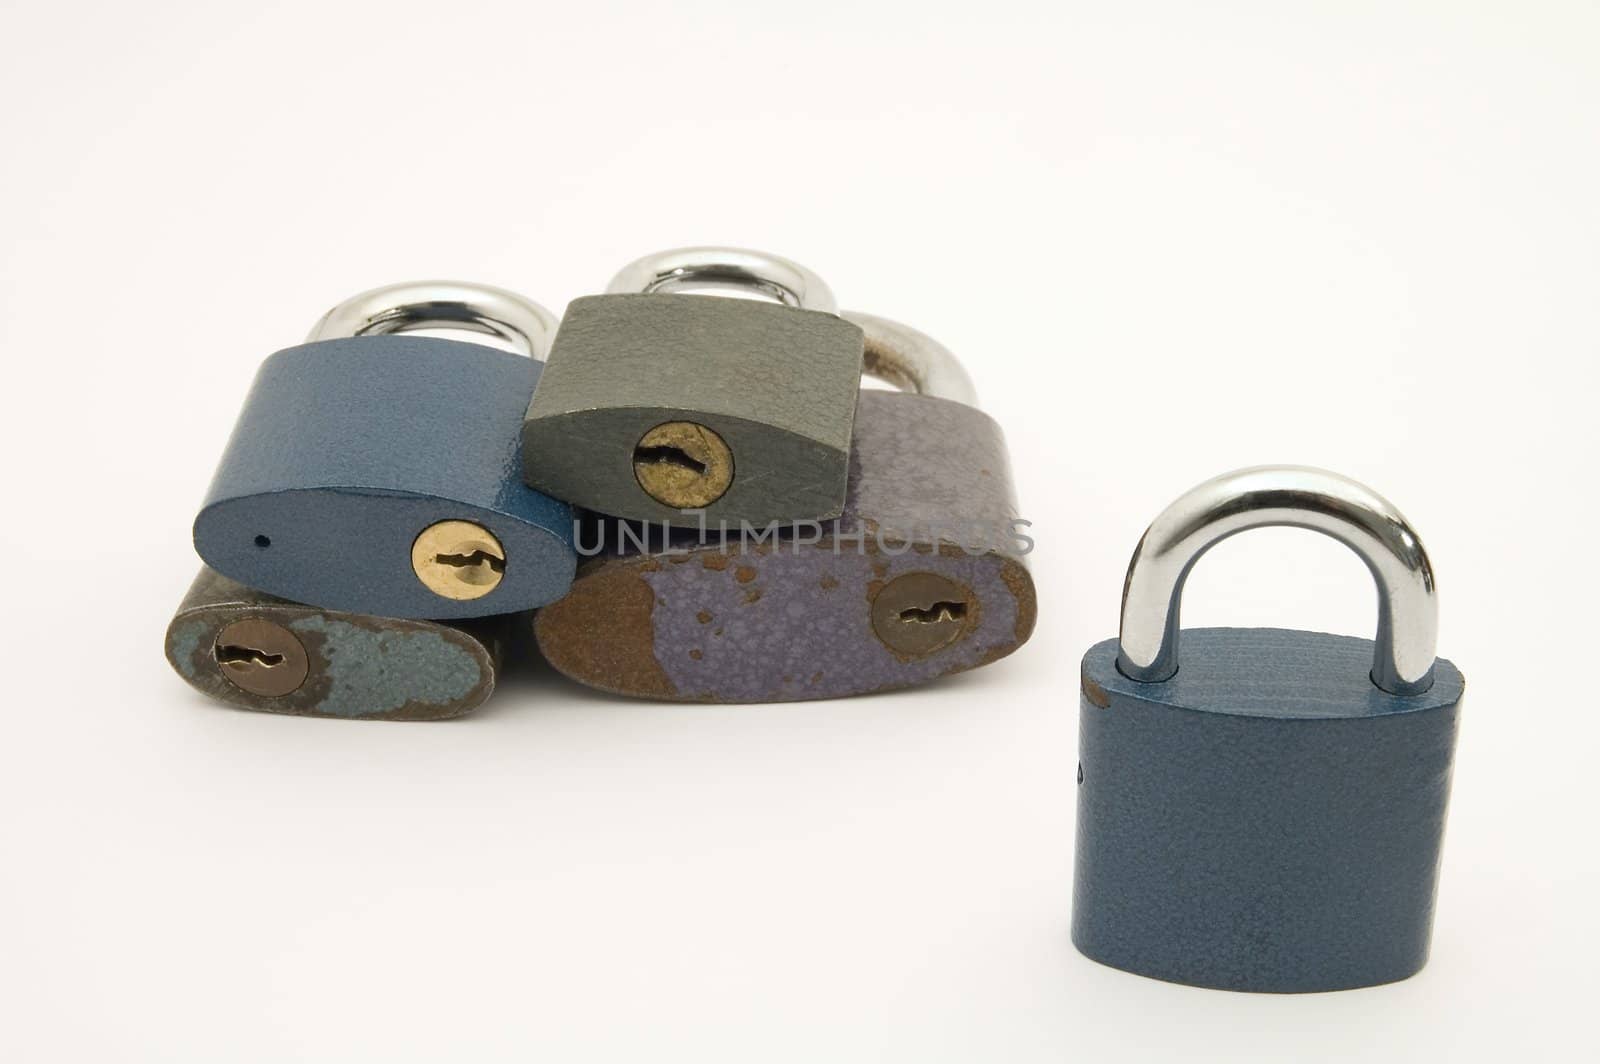 five old locks isolated on white background